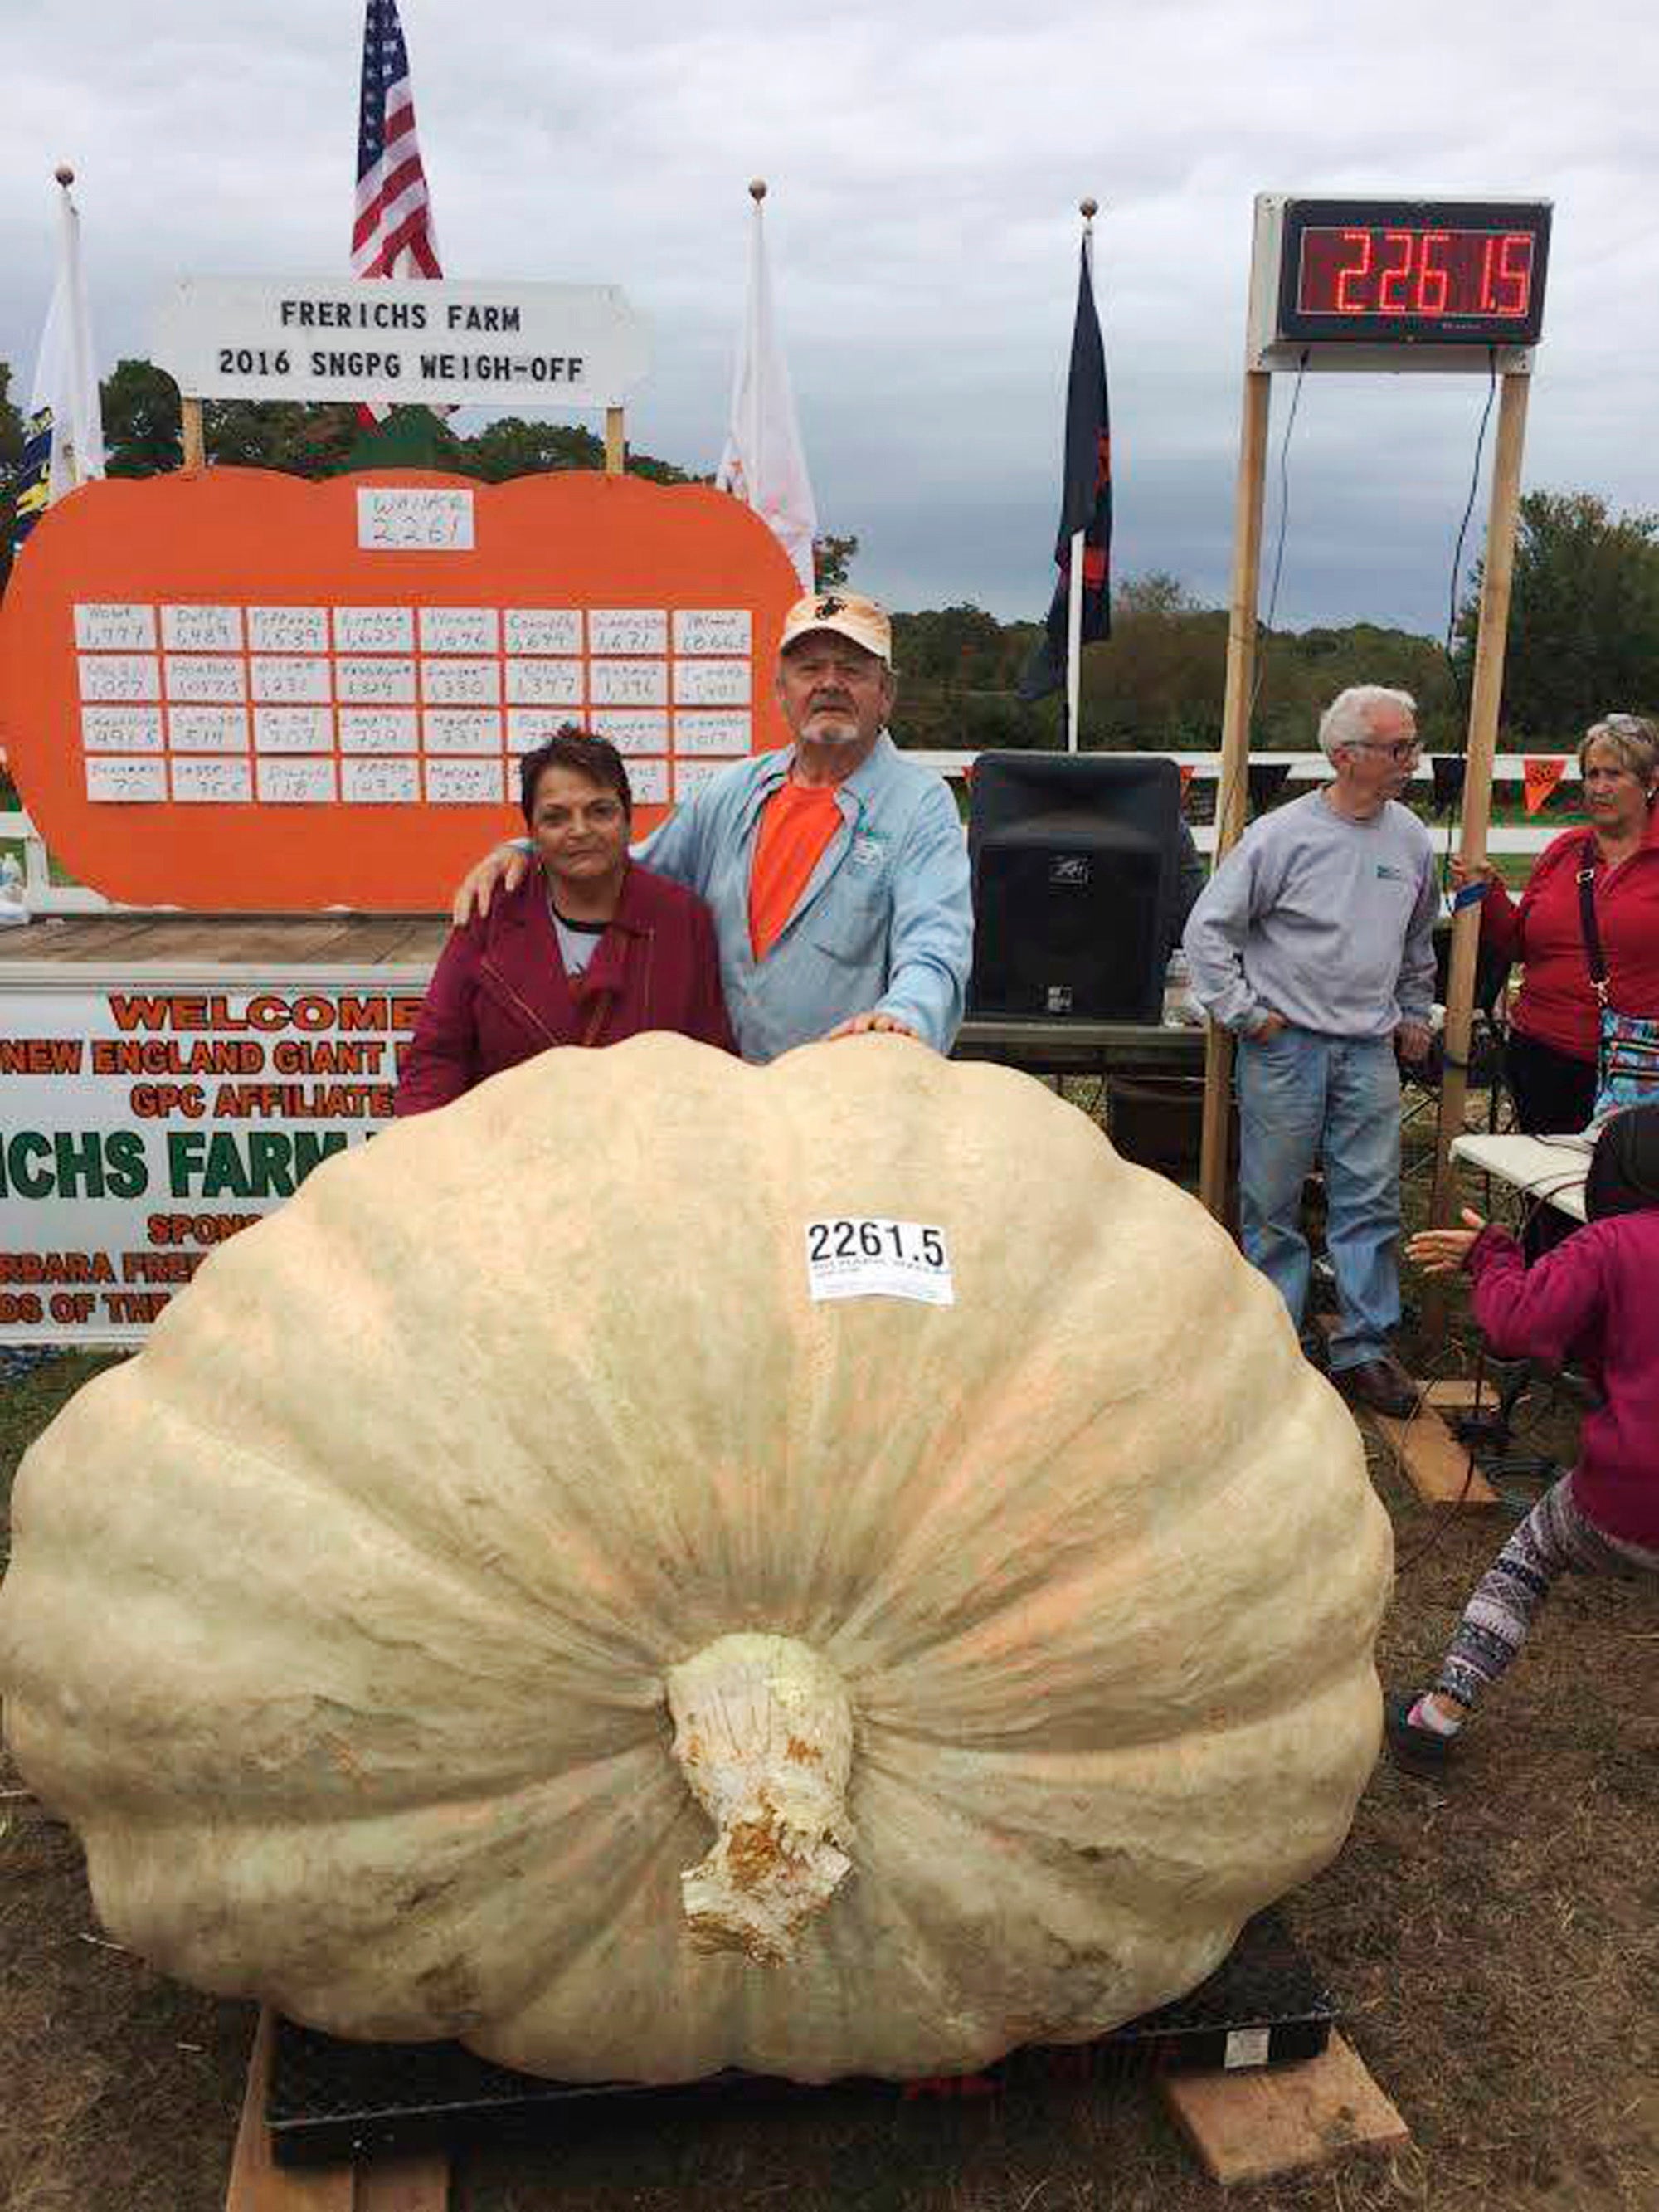 rhode-island-man-squashes-son-s-giant-pumpkin-record-with-2-261-pounder